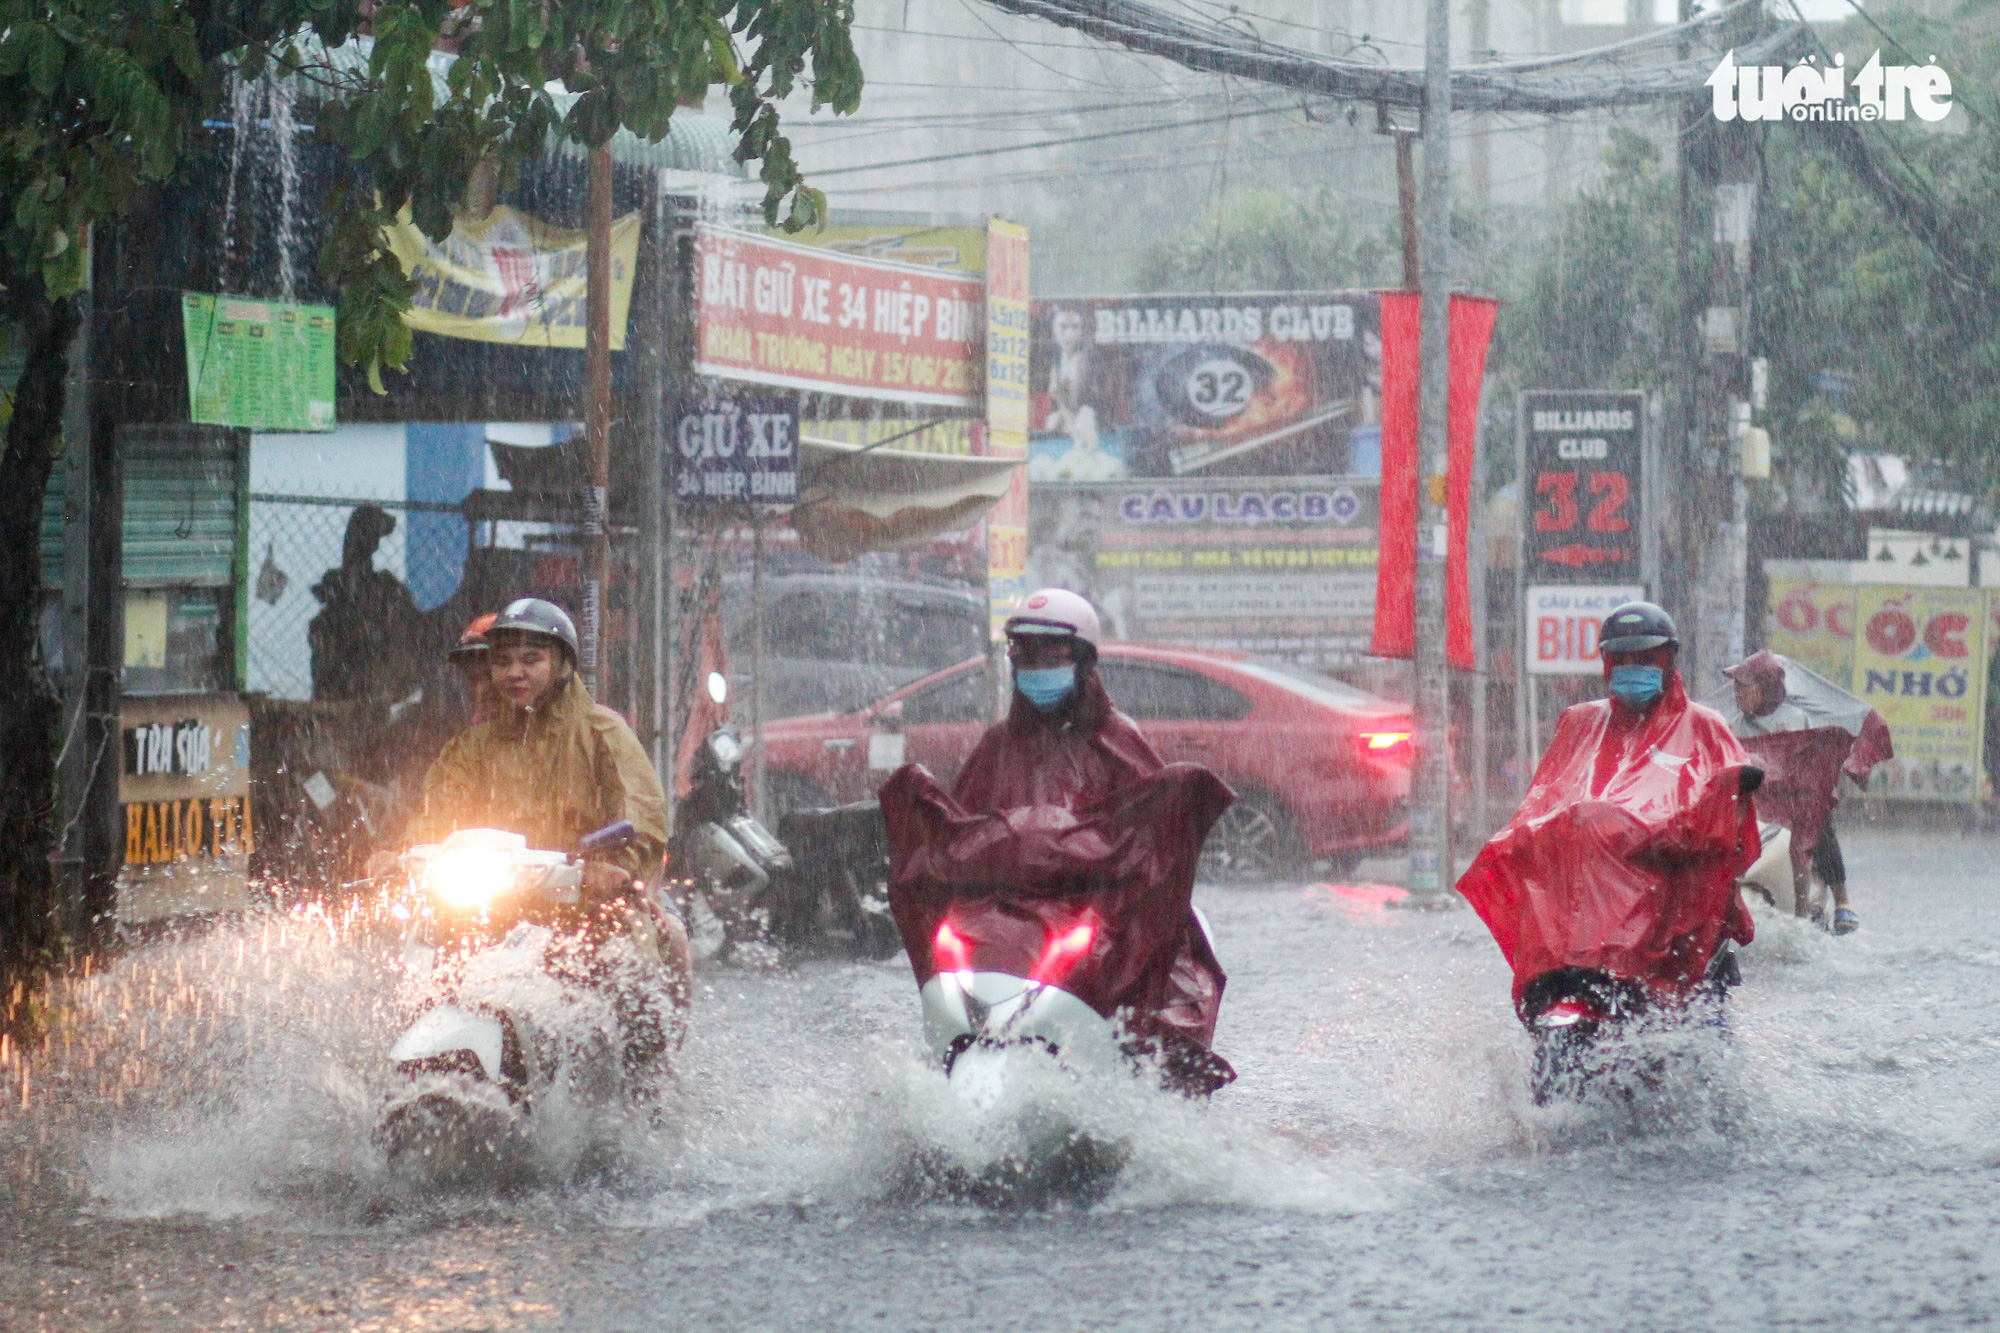 Commuters travel on a flooded street after heavy rain in Ho Chi Minh City, Vietnam September 6, 2020. Photo: Chau Tuan / Tuoi Tre